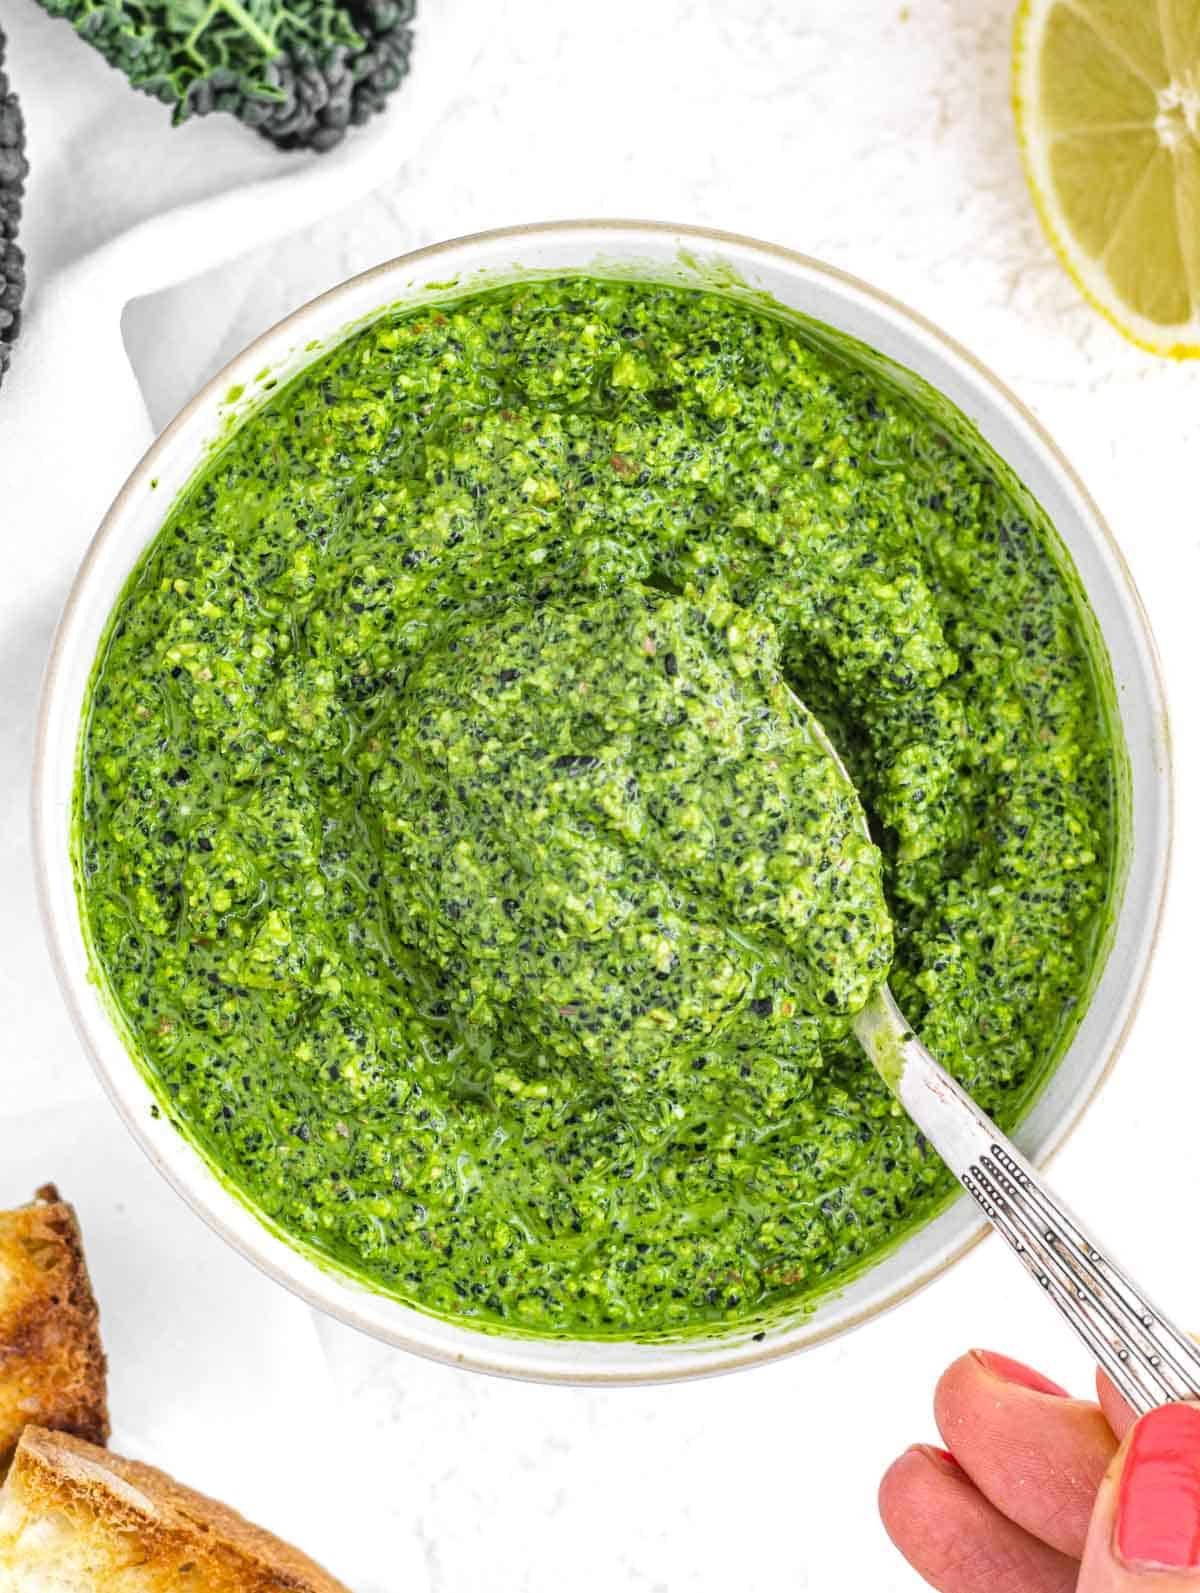 Kale pesto with hand and spoon